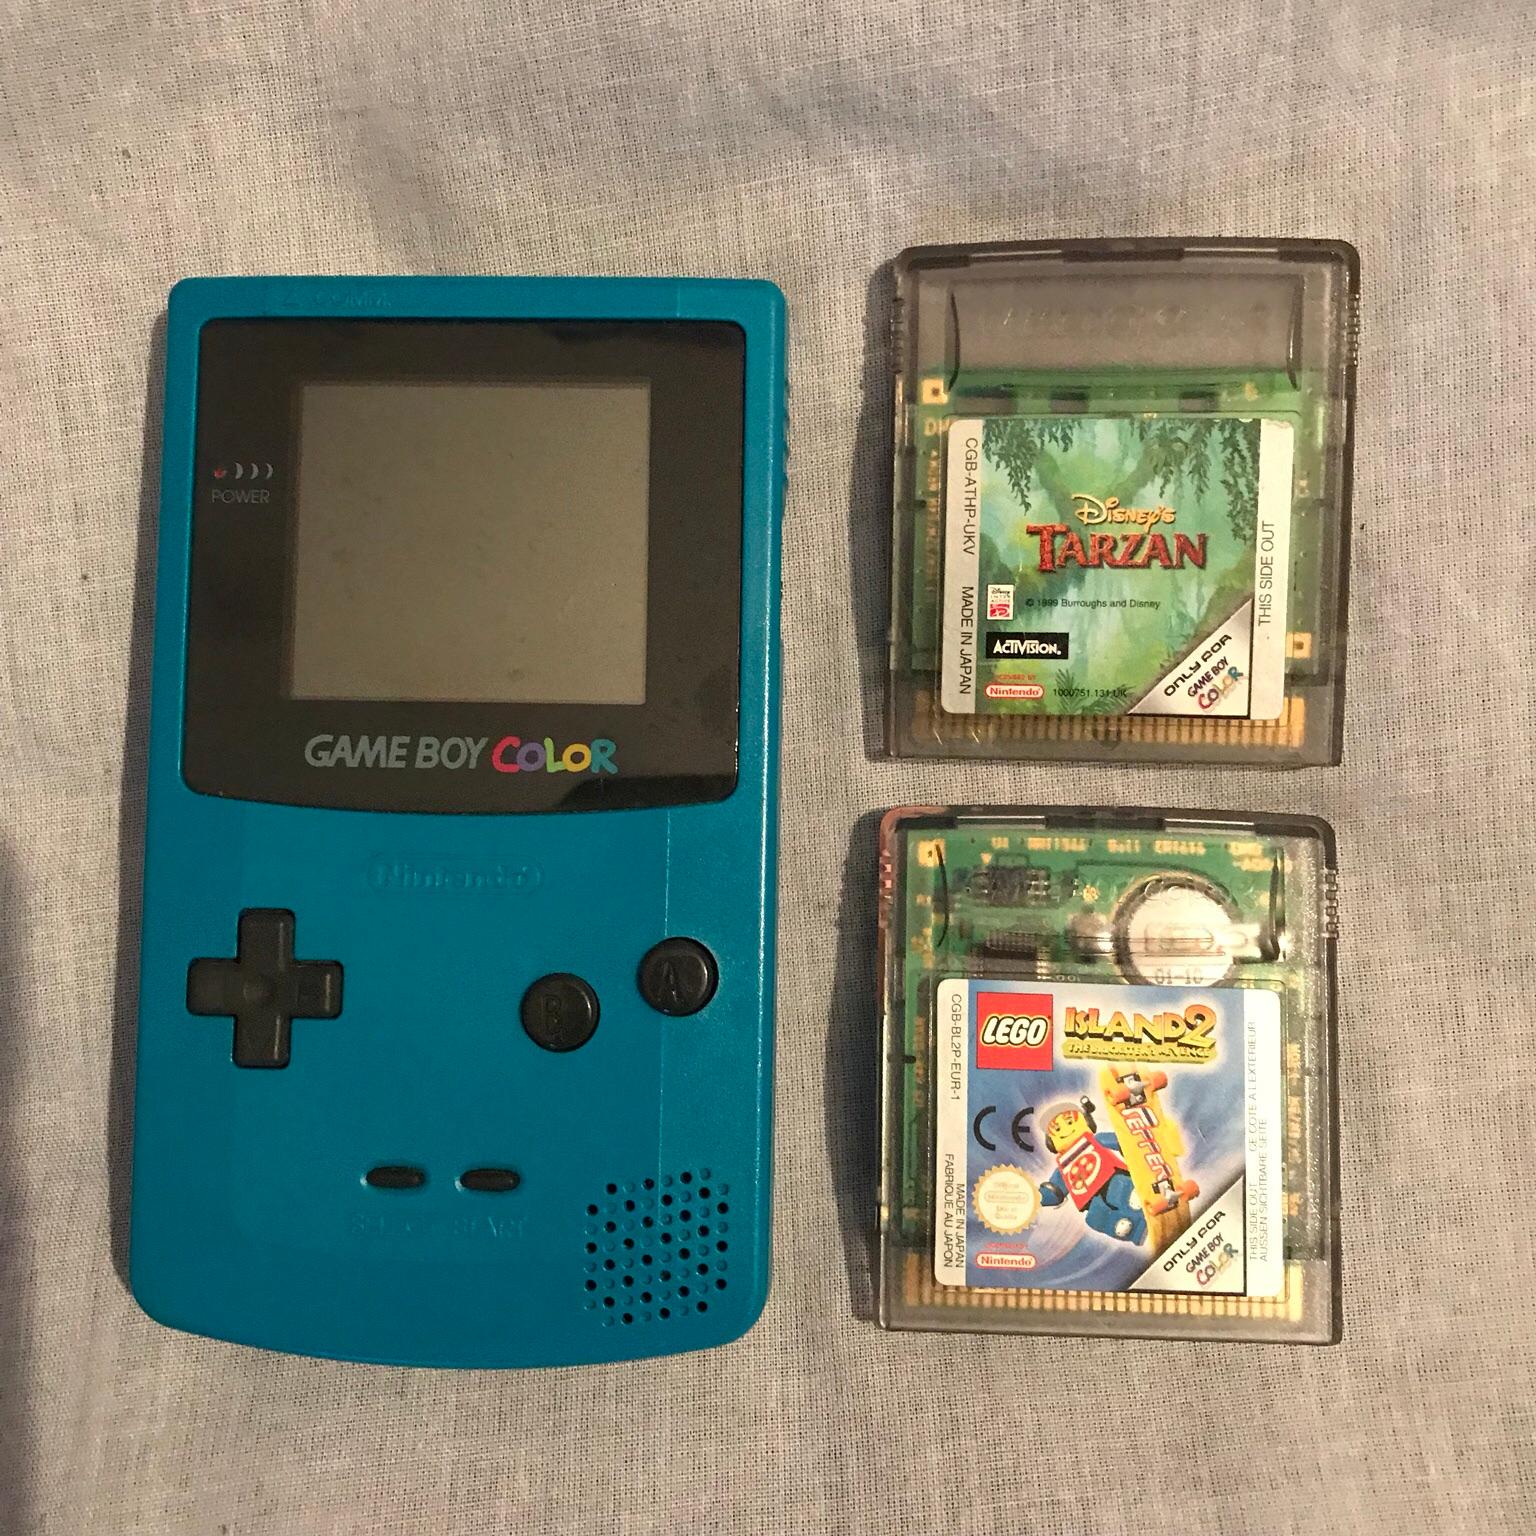 Nintendo Gameboy color & two games. CG3-001. in SW18 Wandsworth for £30.00  for sale | Shpock